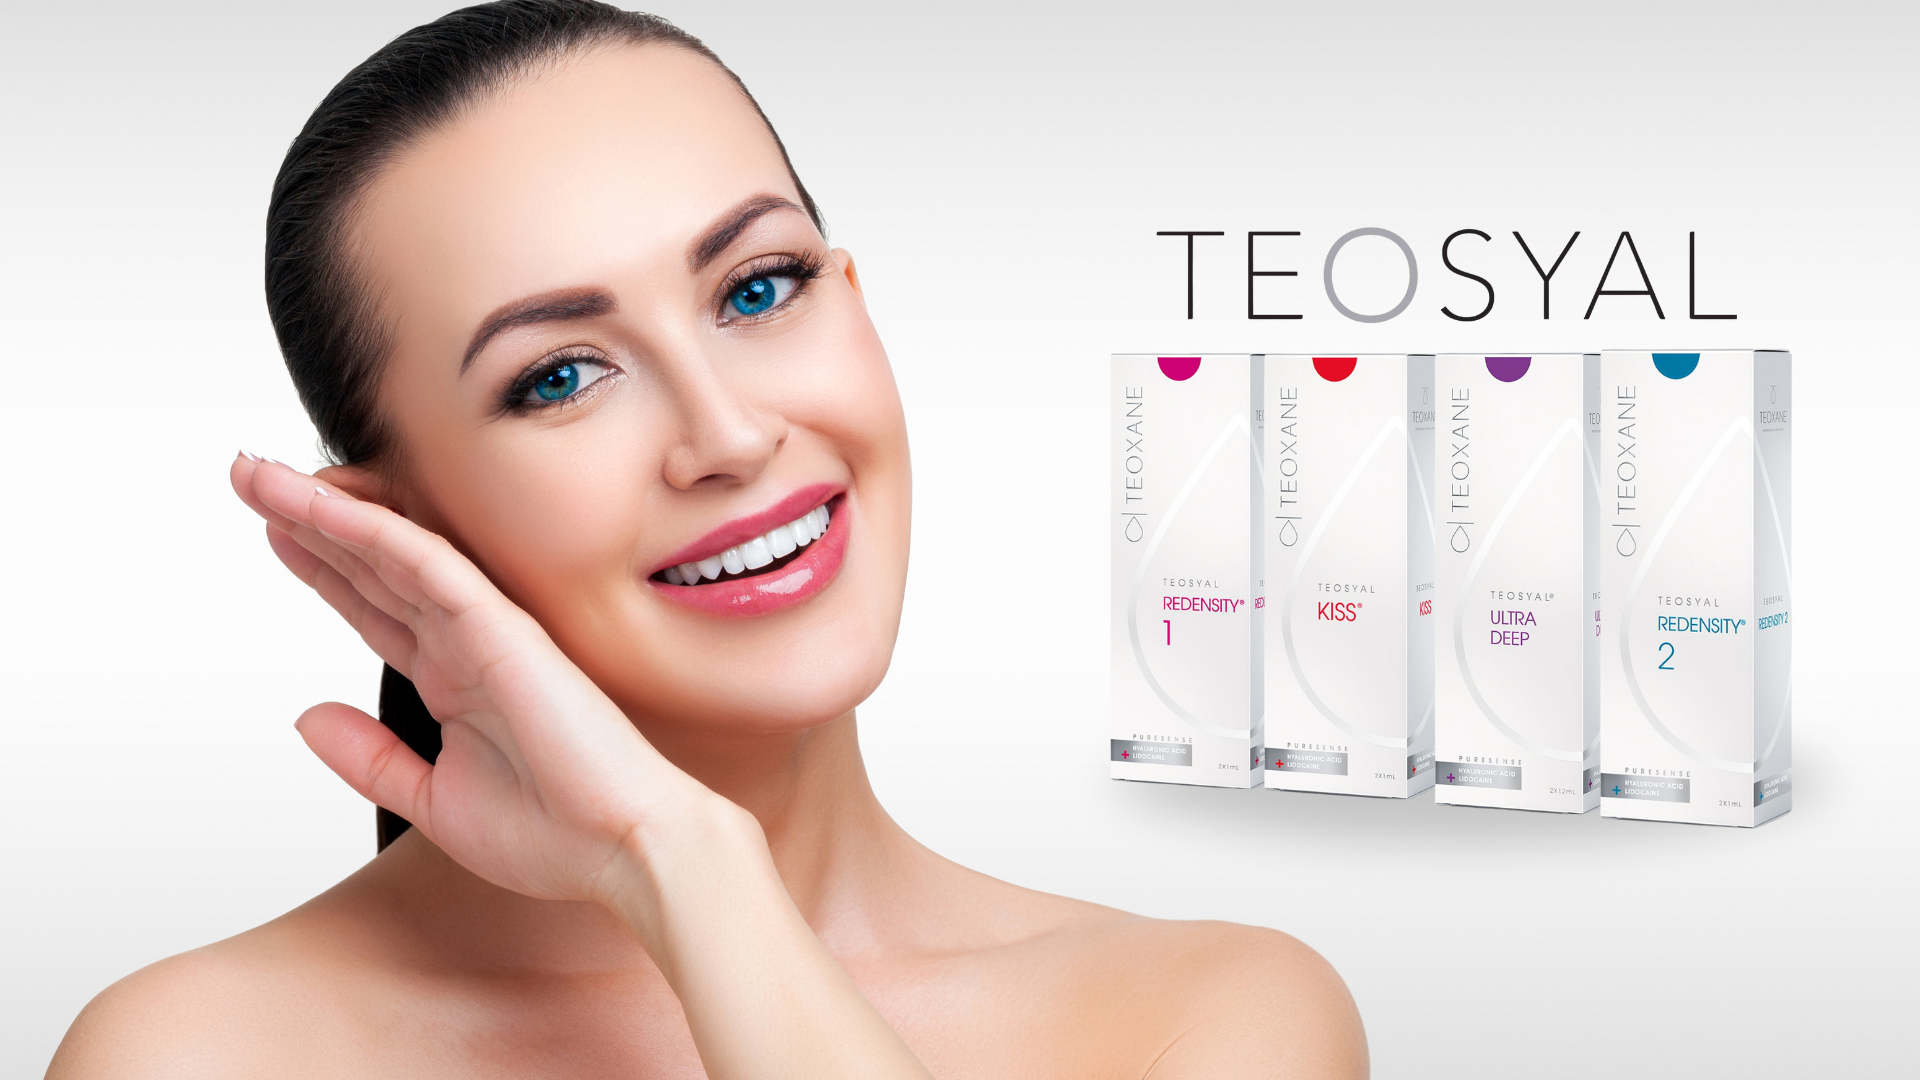 Teosyal fillers